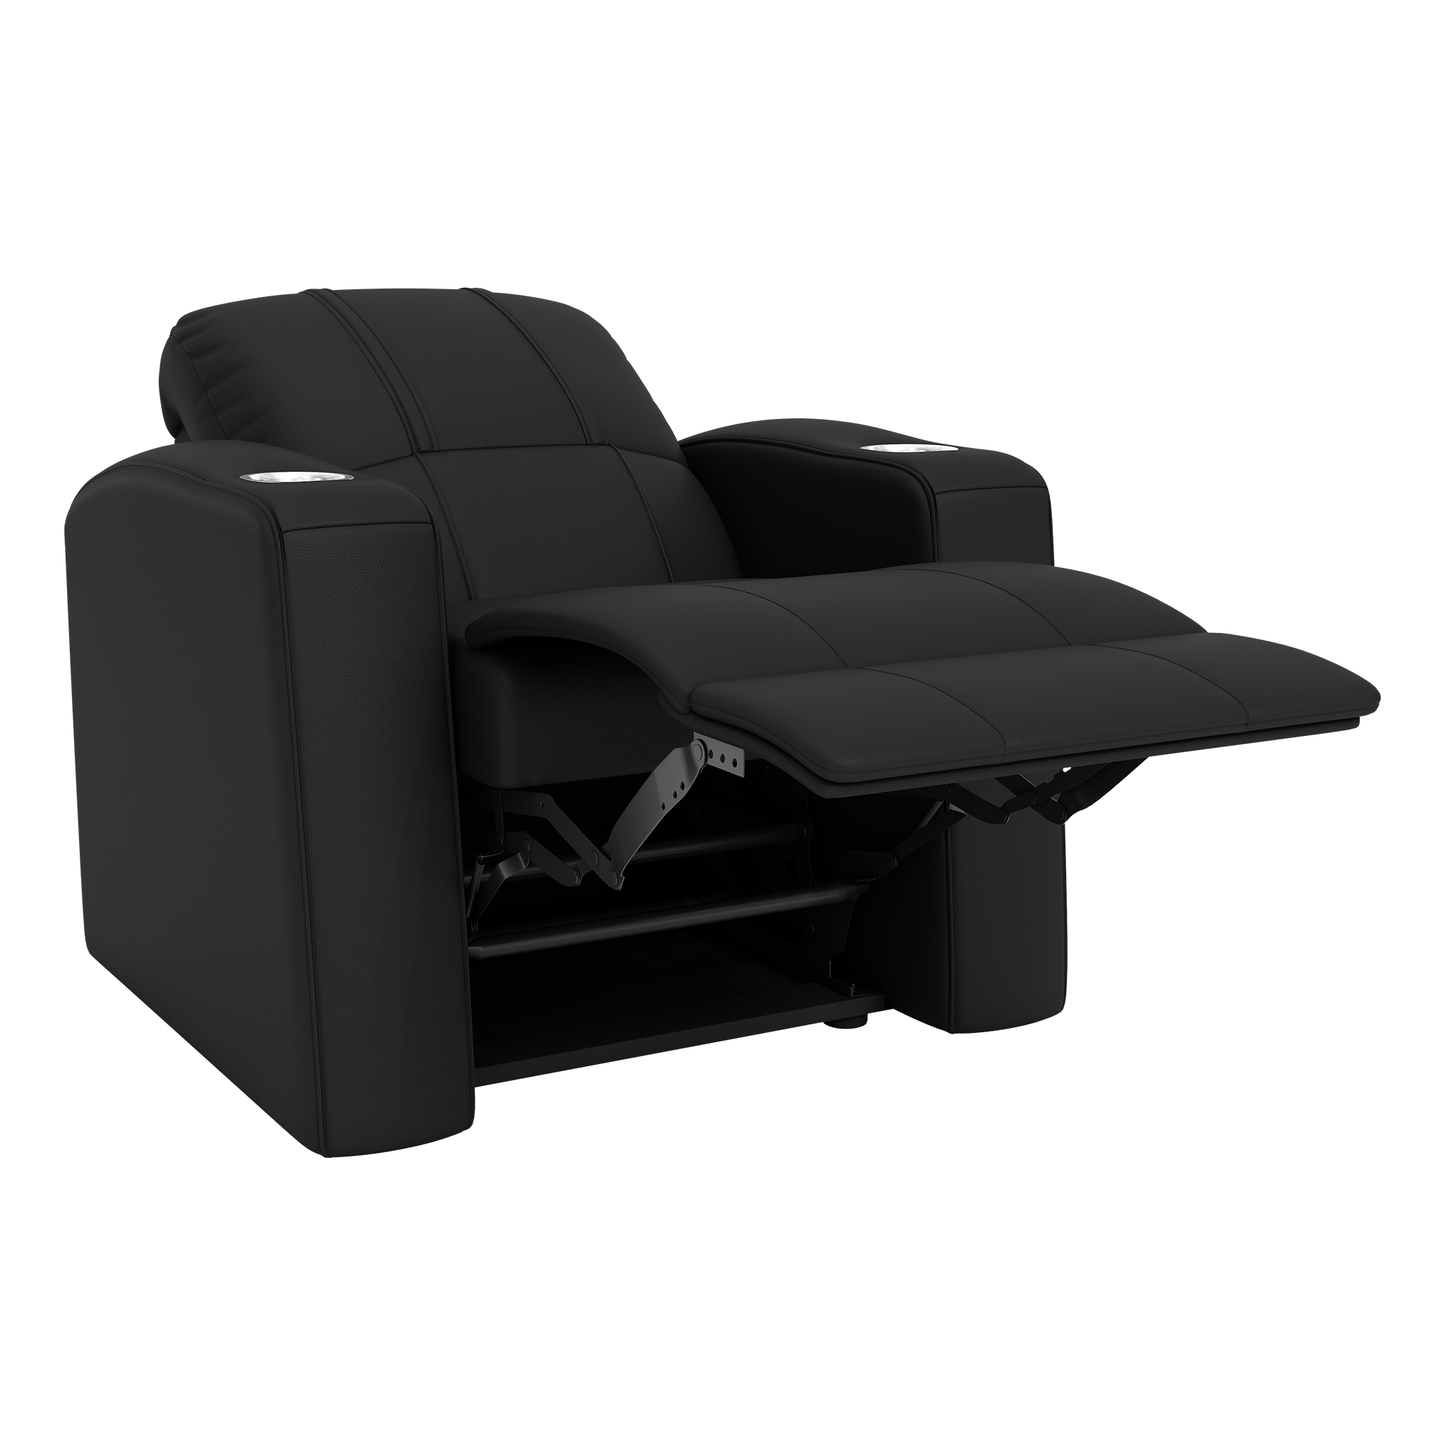 Relax Home Theater Recliner with Toronto Raptors Global Logo